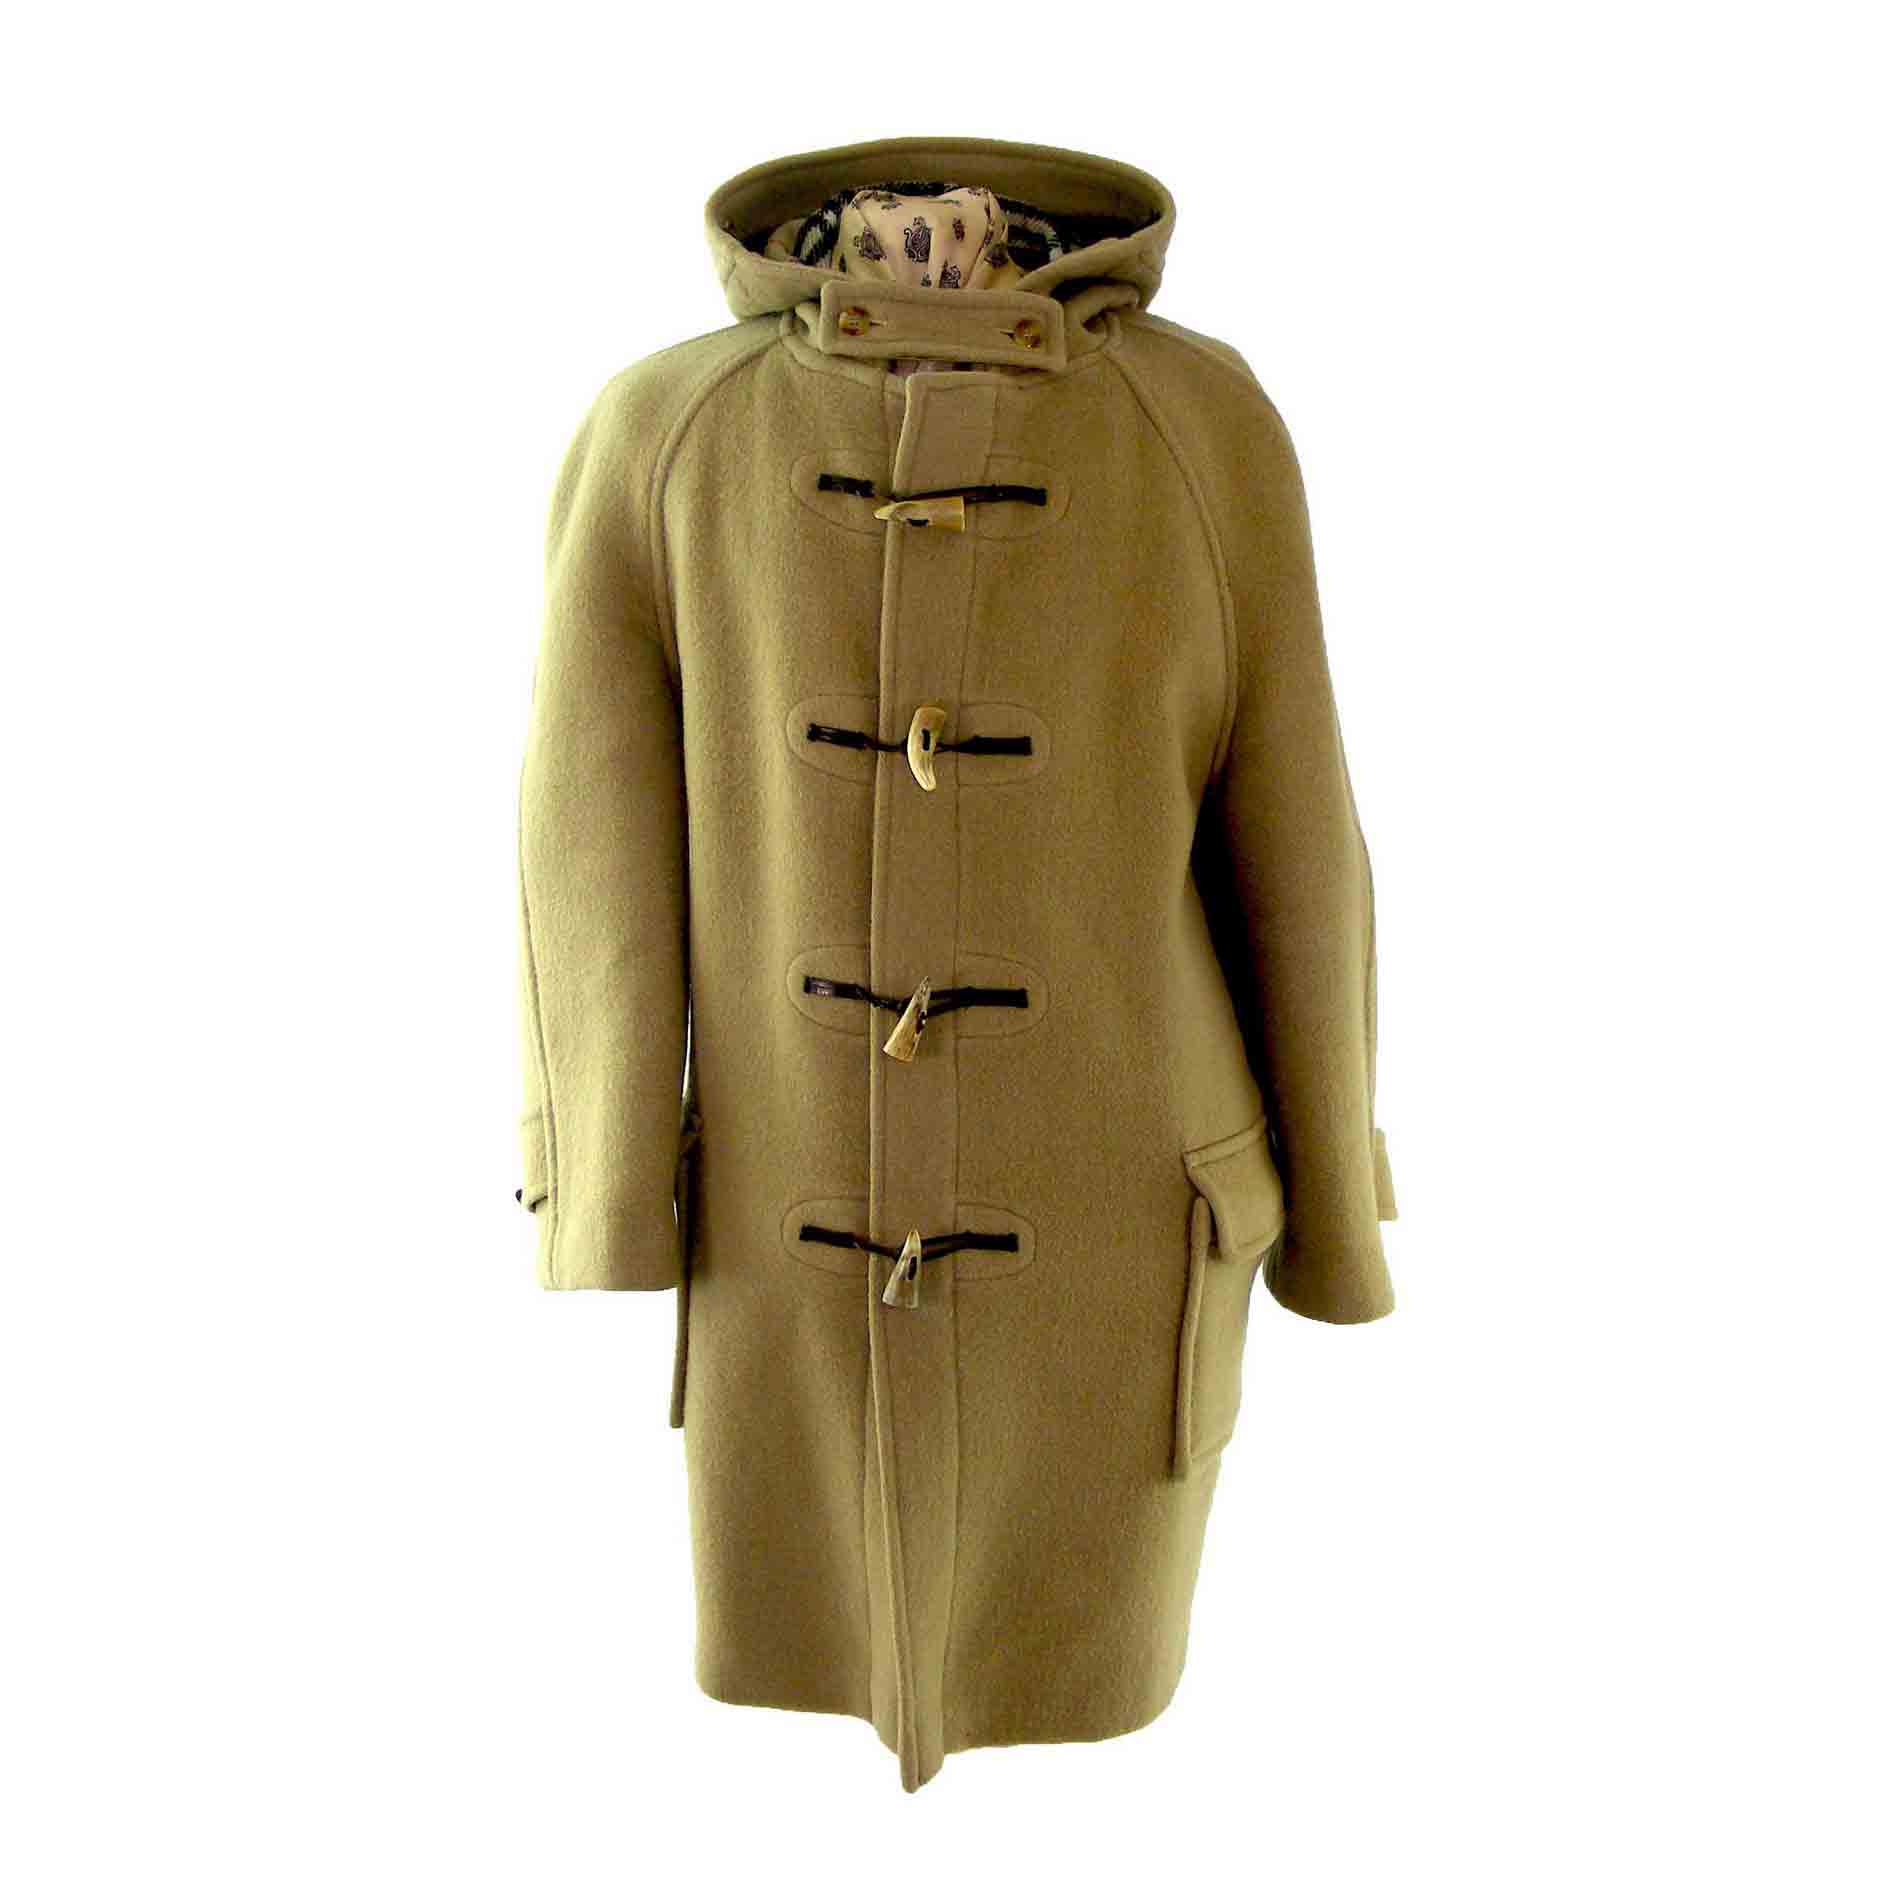 Vintage Burberry duffle Coat with hood & toggles - Blue 17 Vintage Clothing